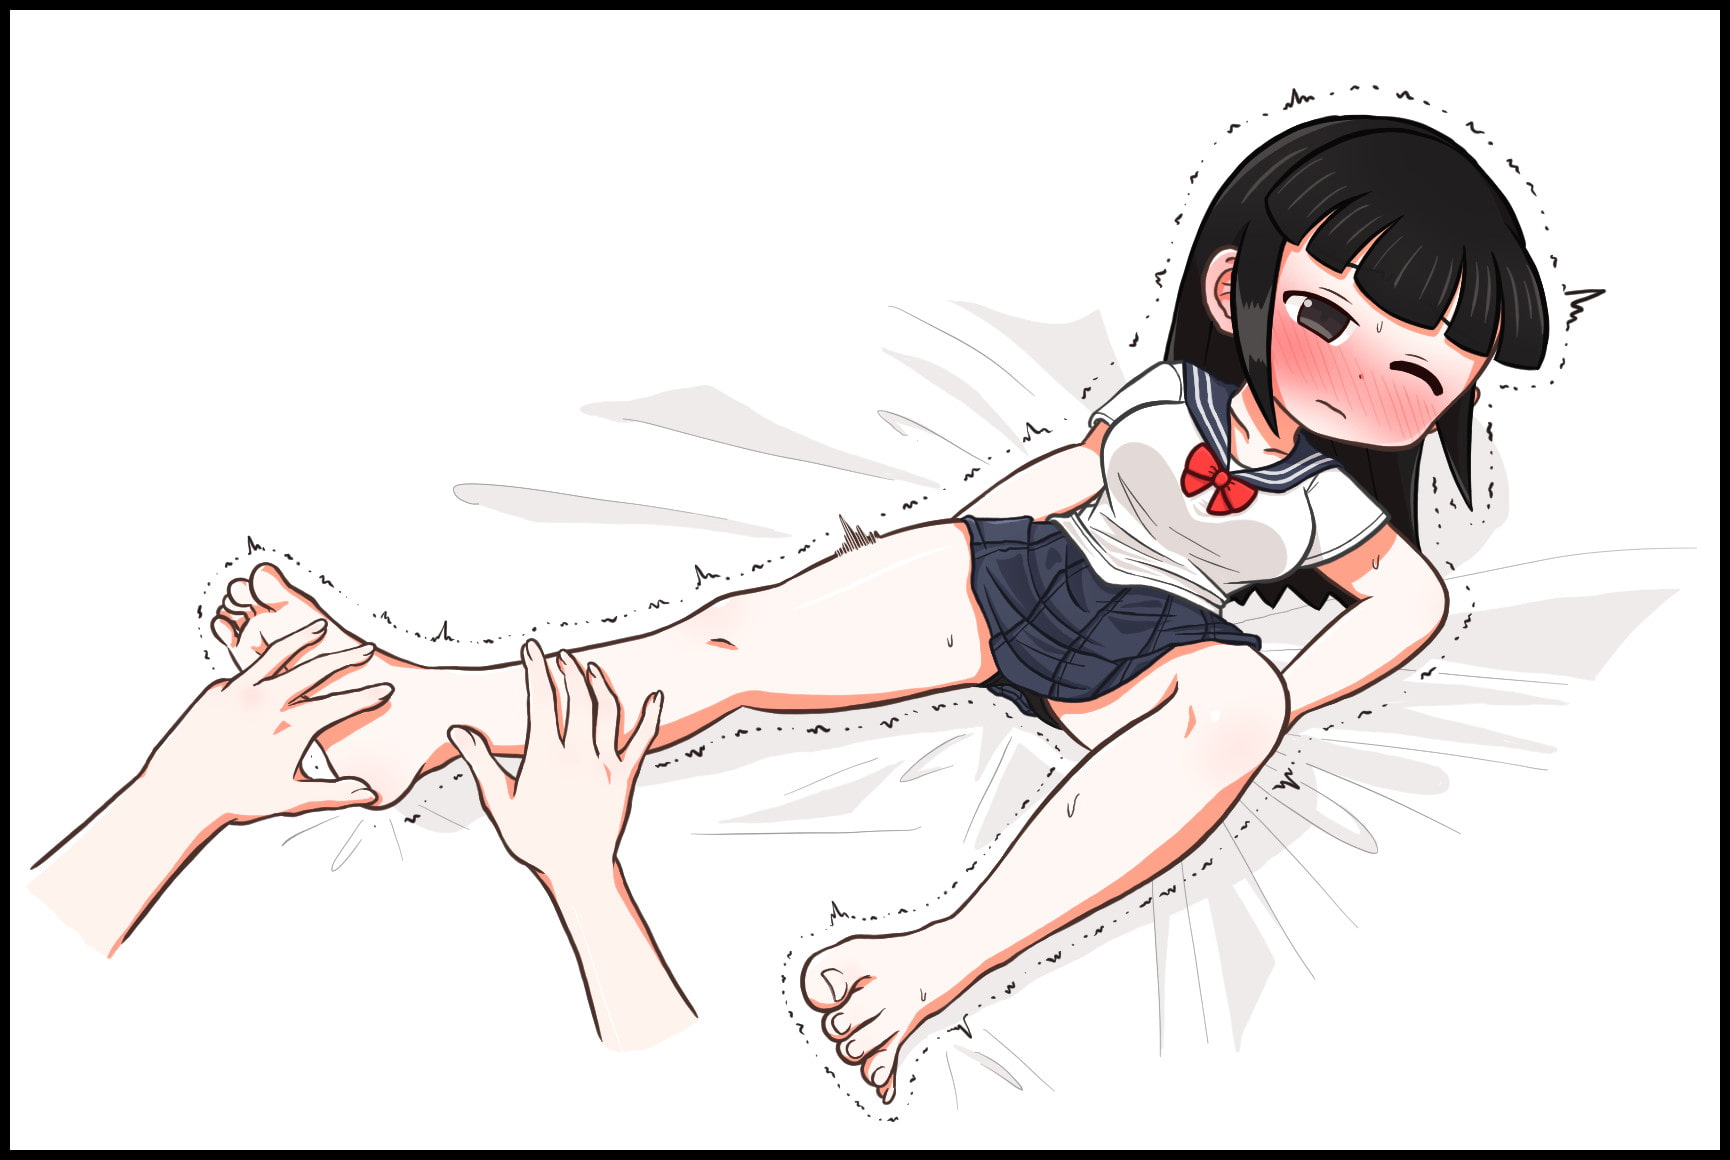 Tickle Variety vol. 1: Awakening the Pure Black-Haired Girl